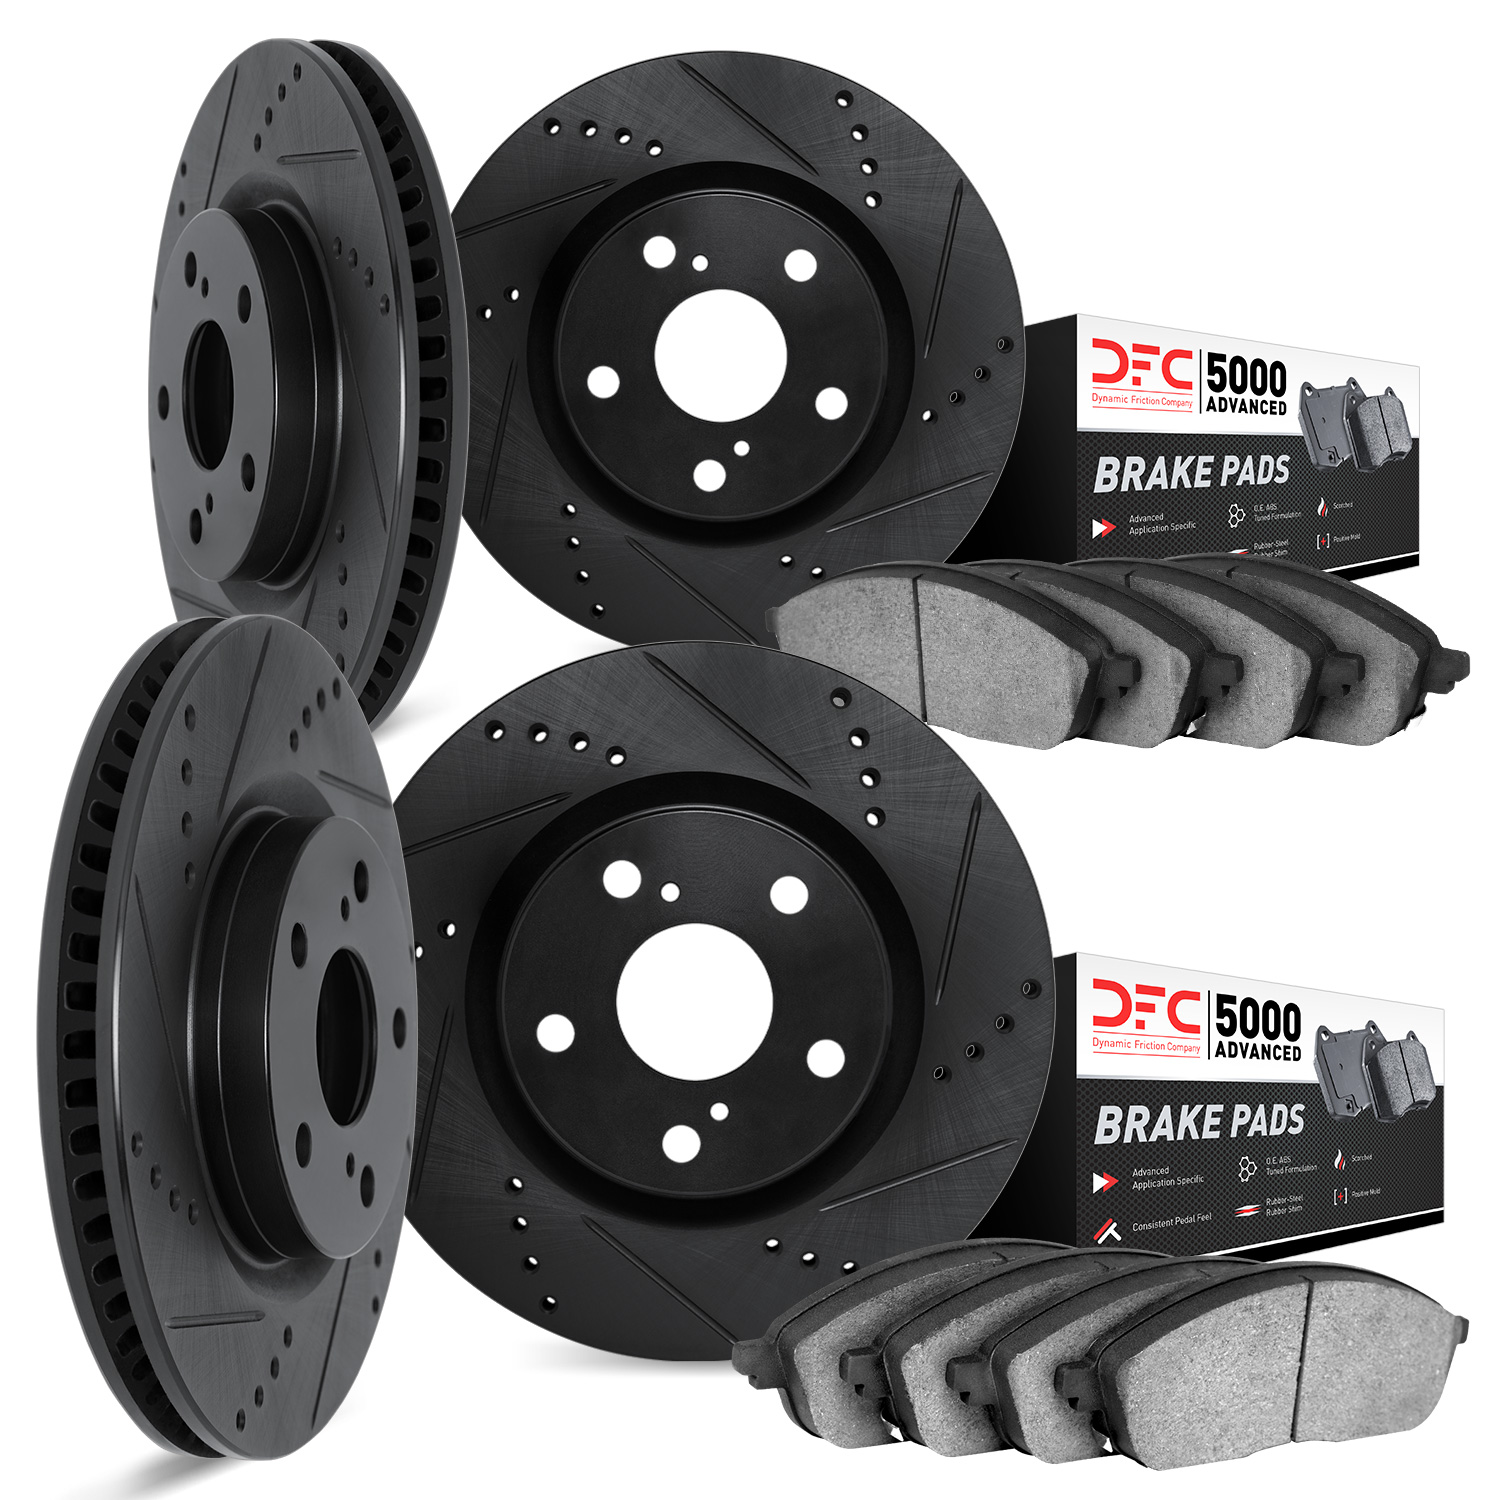 8504-31008 Drilled/Slotted Brake Rotors w/5000 Advanced Brake Pads Kit [Black], 2001-2005 BMW, Position: Front and Rear